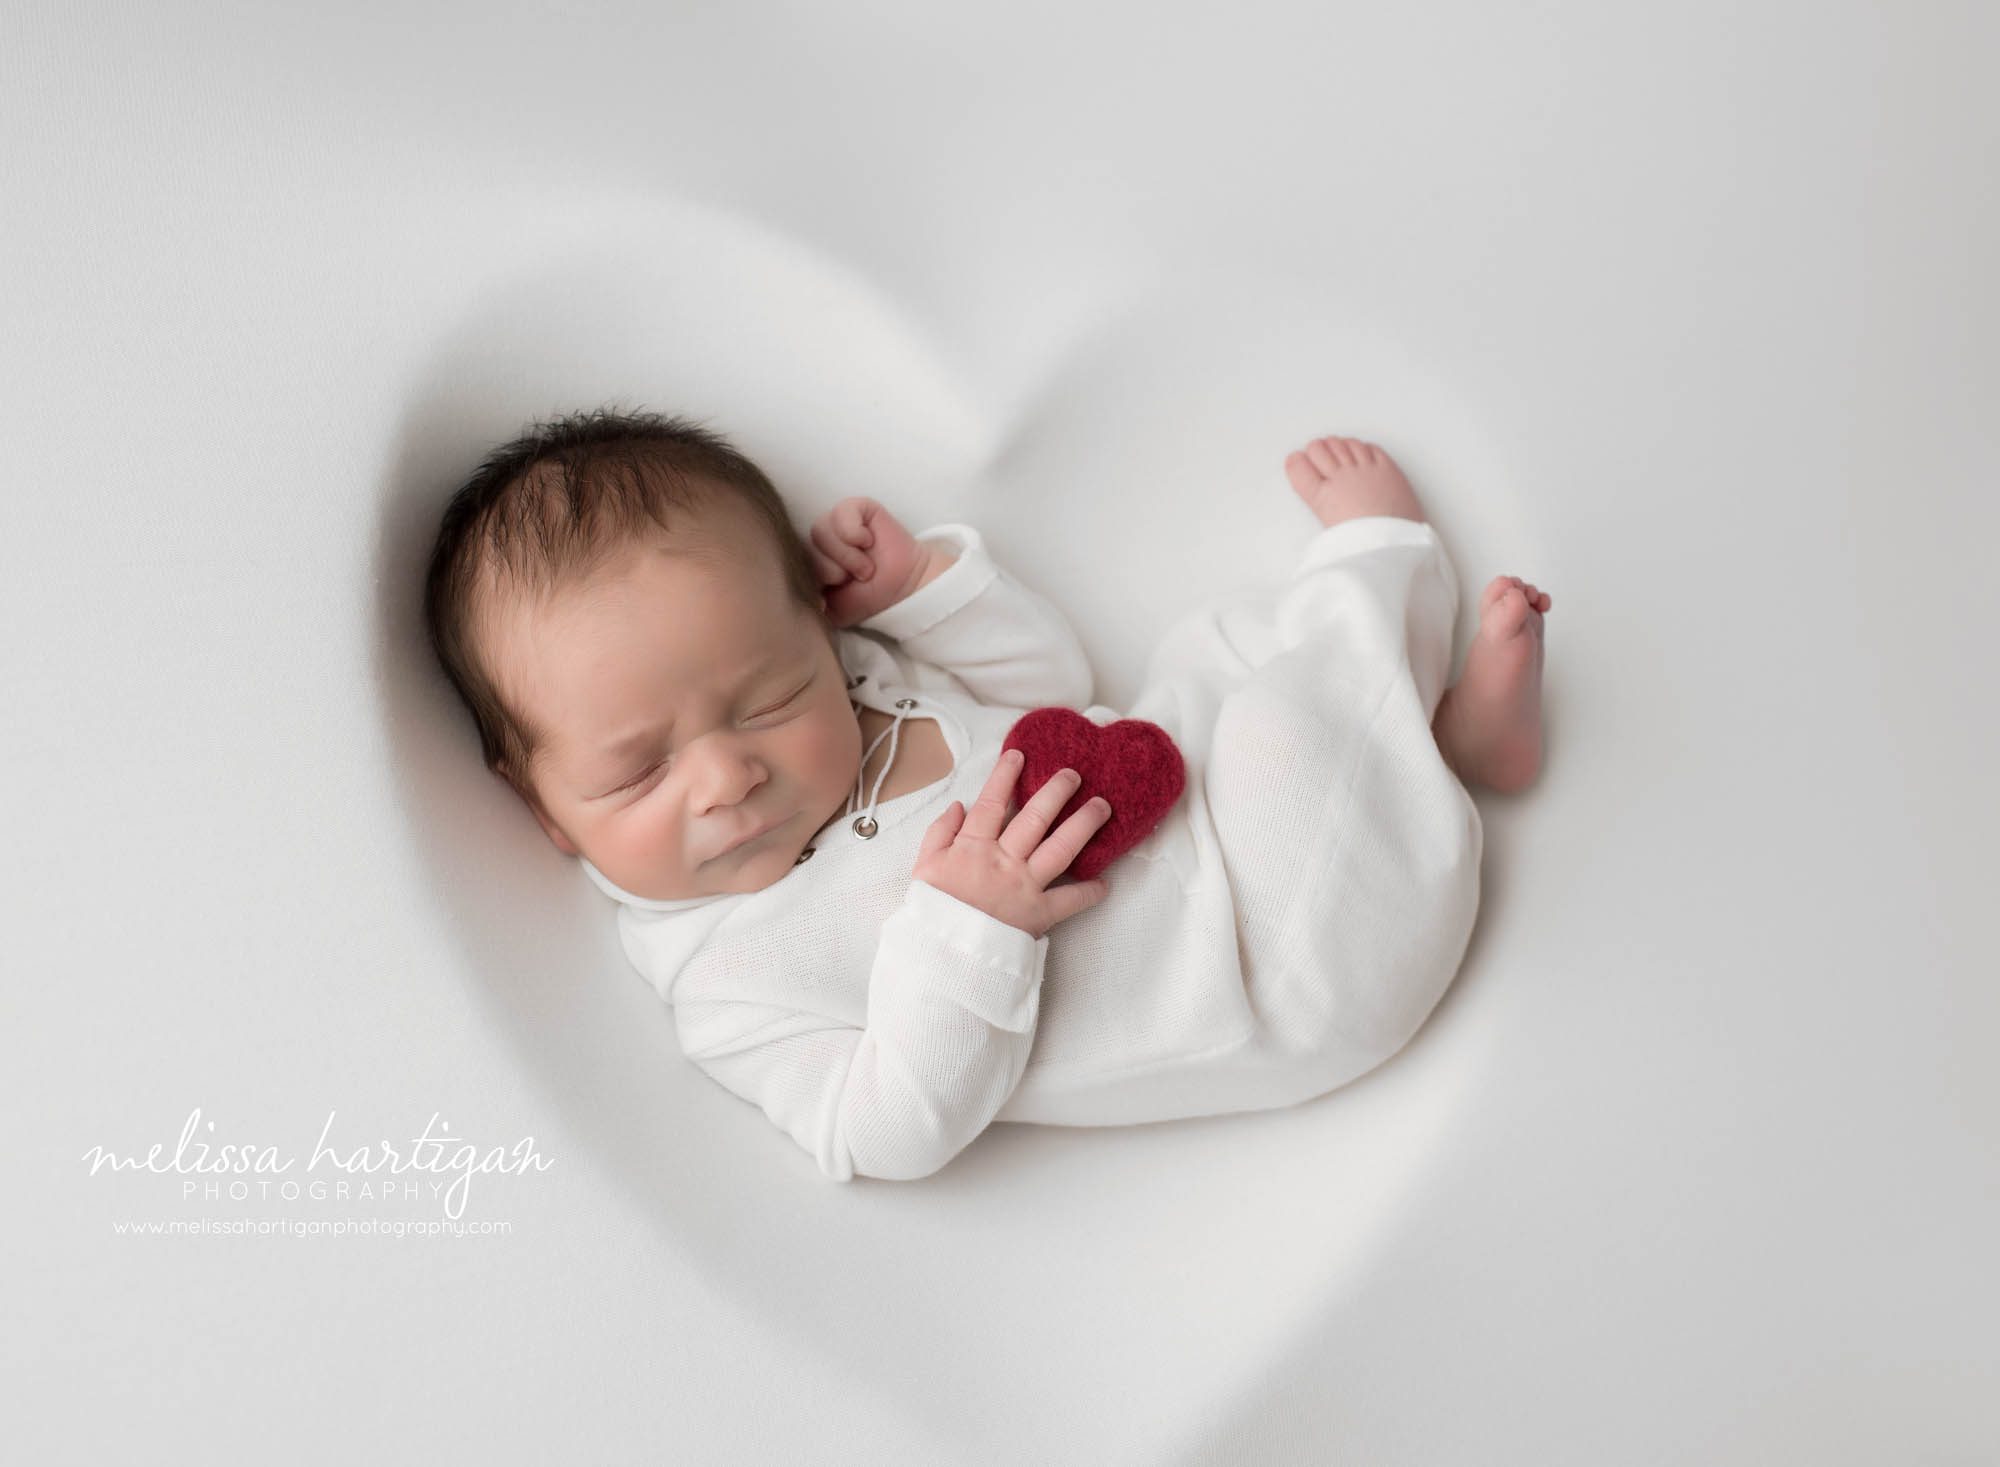 Newborn baby boy wearing white sleeper outfit posed on white backdrop with heart shaped outline underneath Hartford country Newborn Photography